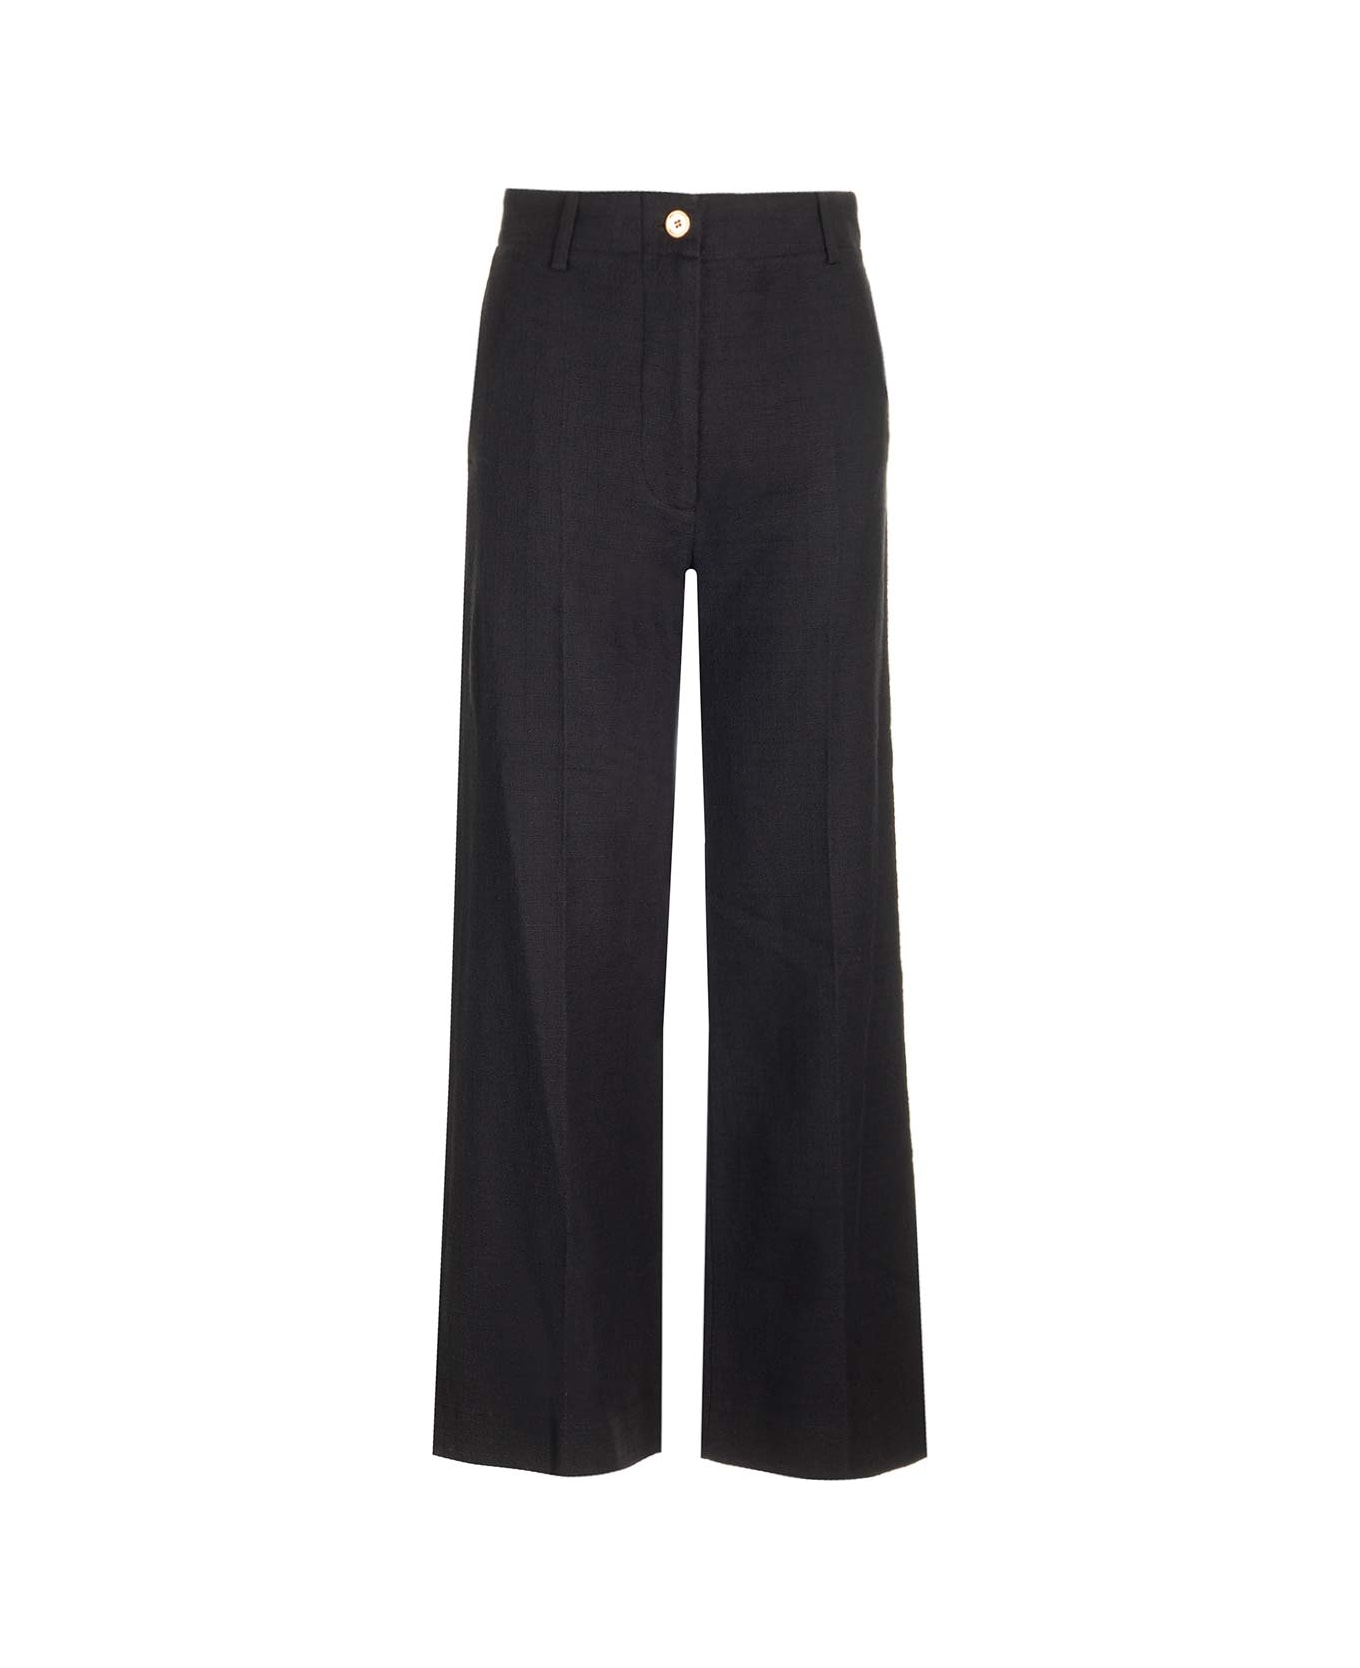 Patou Stretch Tweed Trousers - BLACK ボトムス